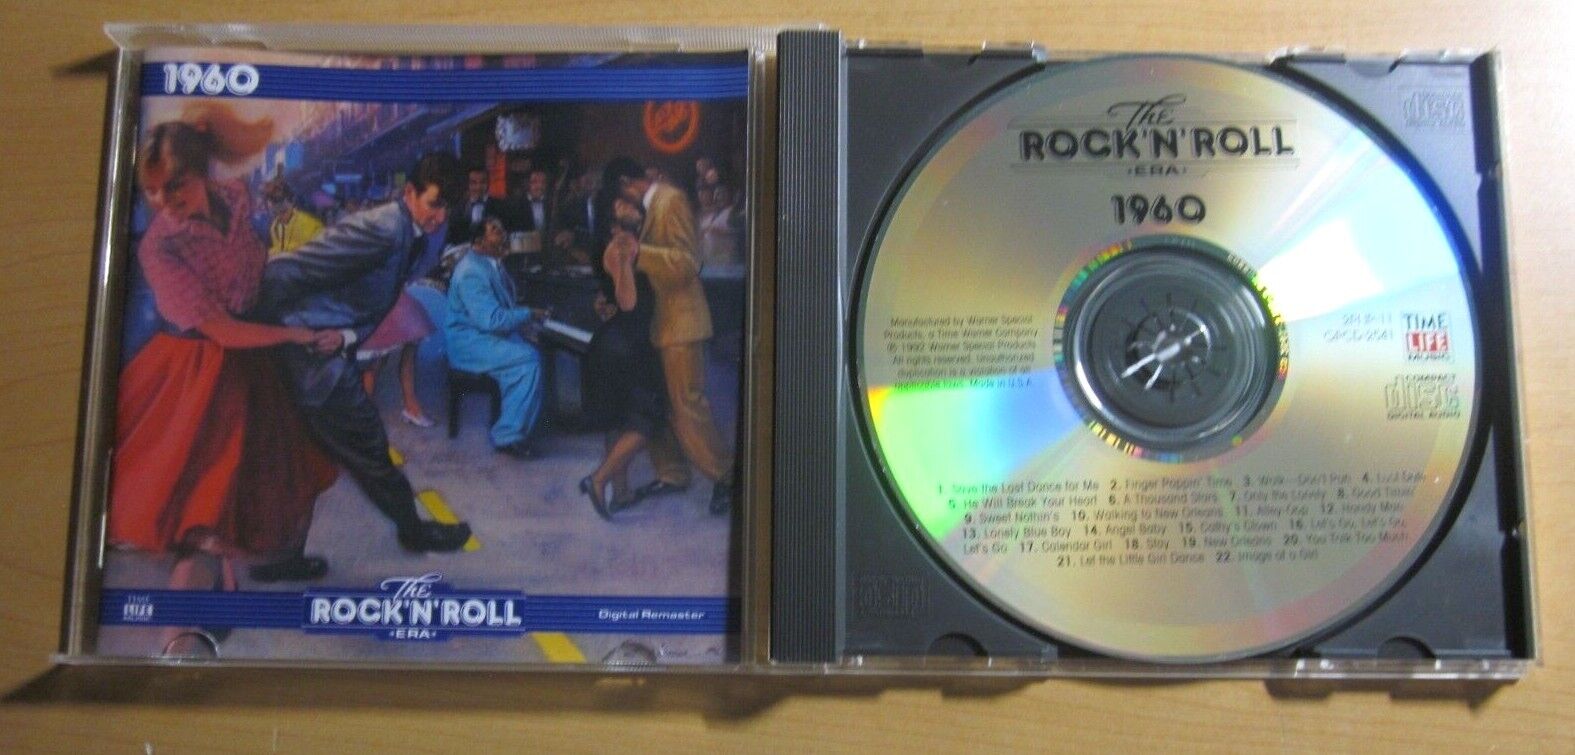 Title:1960:TIME LIFE Music: The Rock n Roll Era - Pick your CD! Excellent - Mint Condition